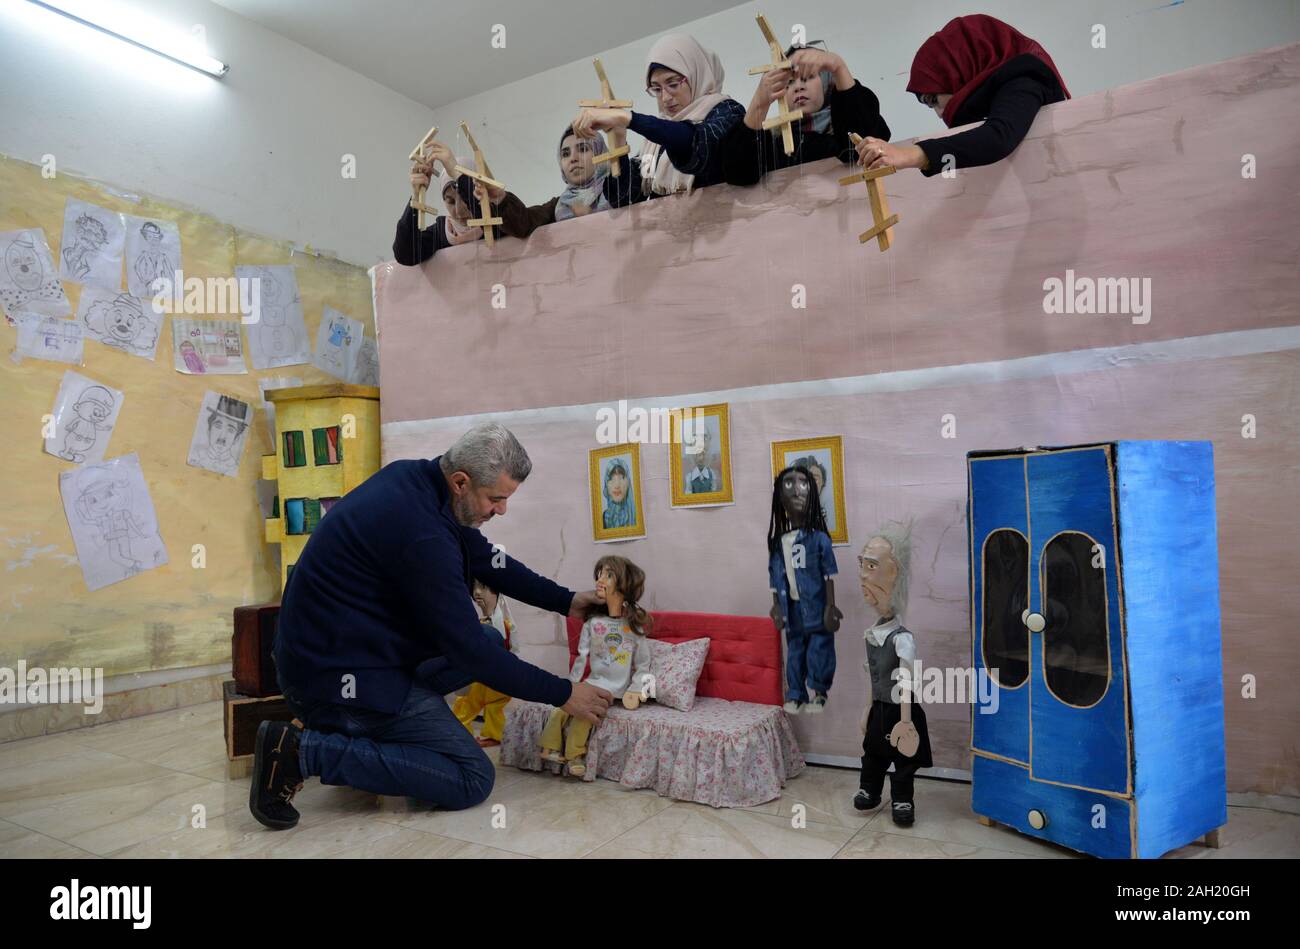 Gaza. 23rd Dec, 2019. Mahdi Karira (Front) and his team members works on their marionettes at his office in Gaza City, on Dec. 23, 2019. Mahdi Karira, a 39-year-old master at making the marionette, spent 6 months on training a group of 8 girls and 2 young men to make puppets and perform puppet theater shows for children, in an attempt to promote the art of puppet theater in the Gaza Strip. Credit: Rizek Abdeljawad/Xinhua/Alamy Live News Stock Photo